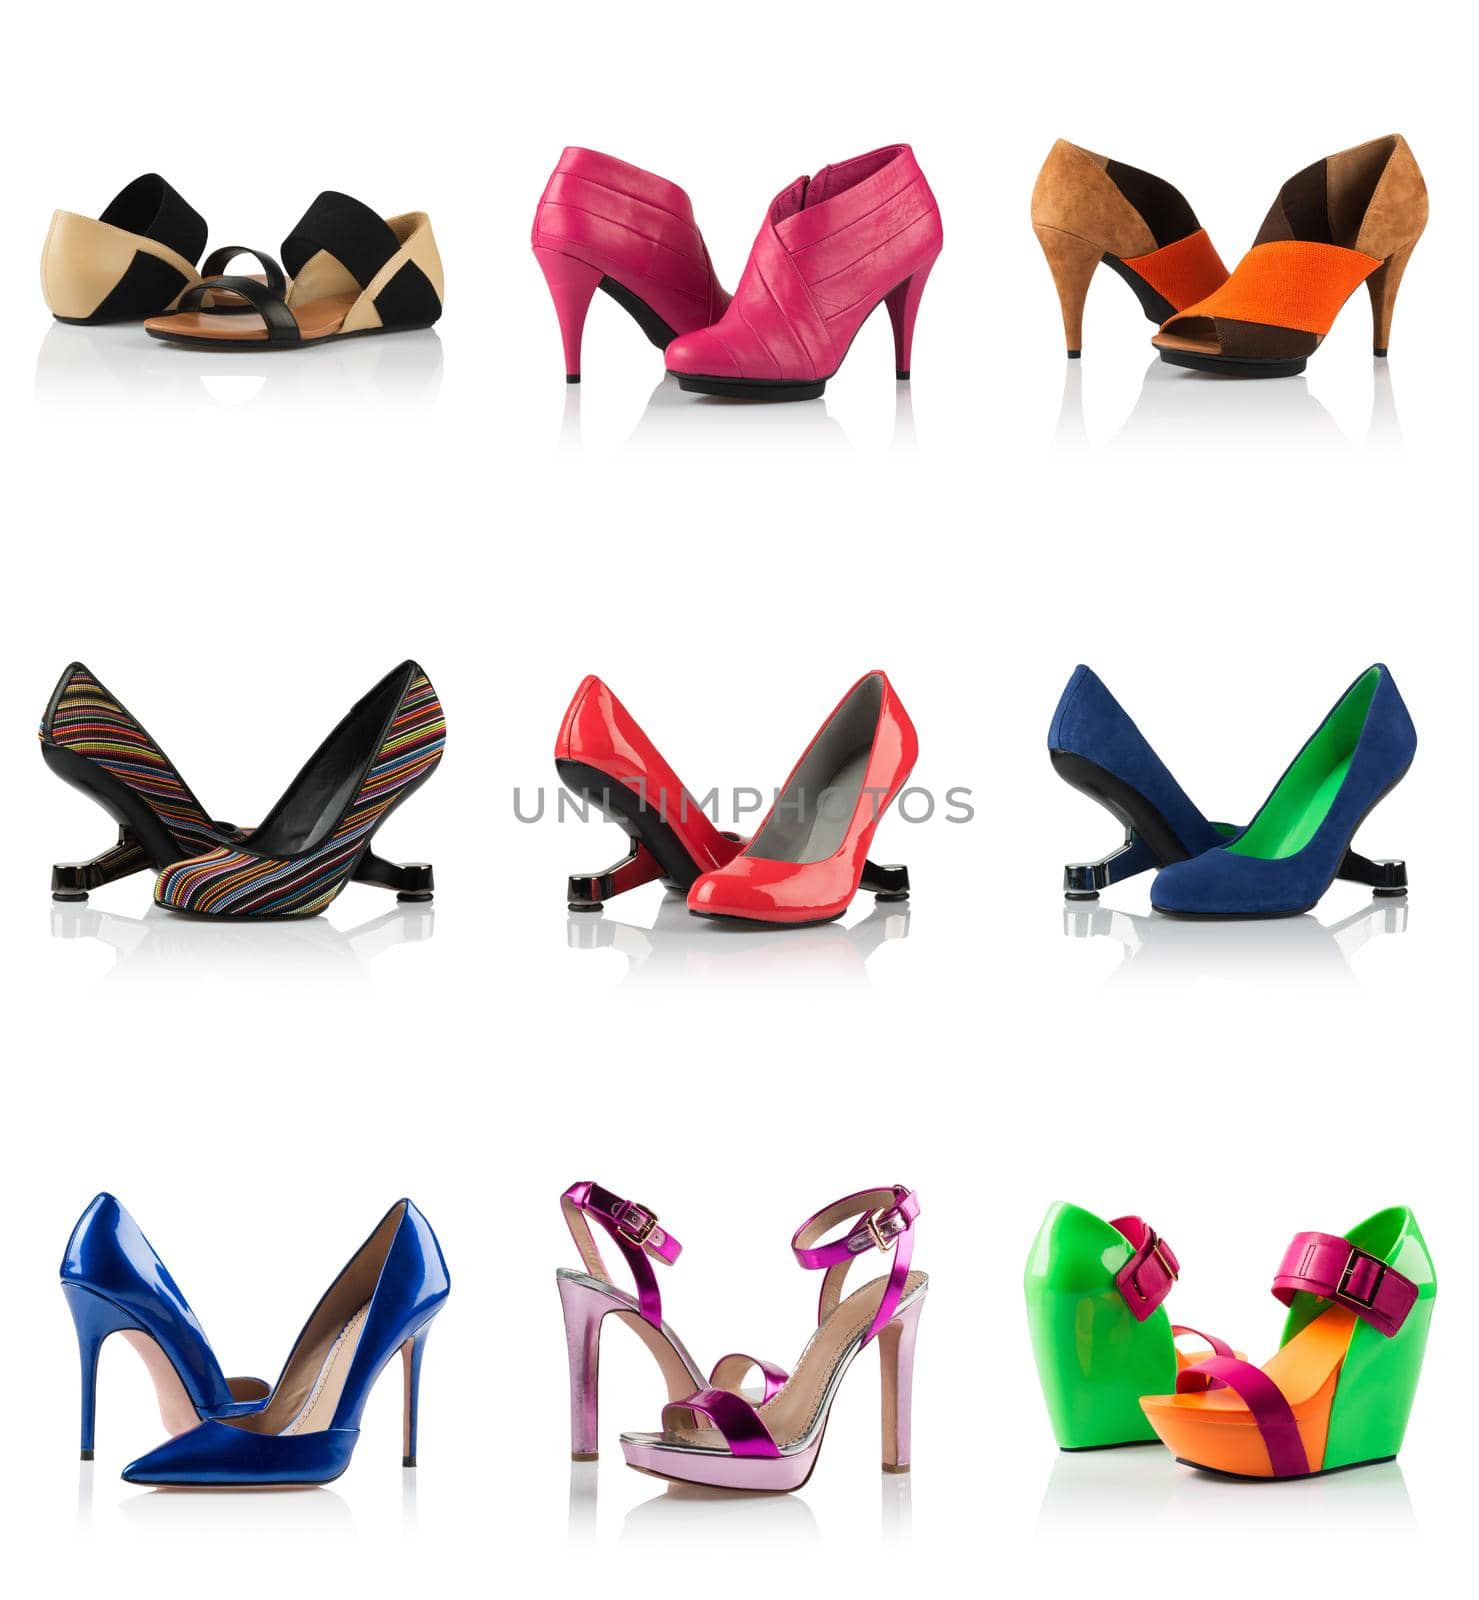 Collection - various types of female shoes over white